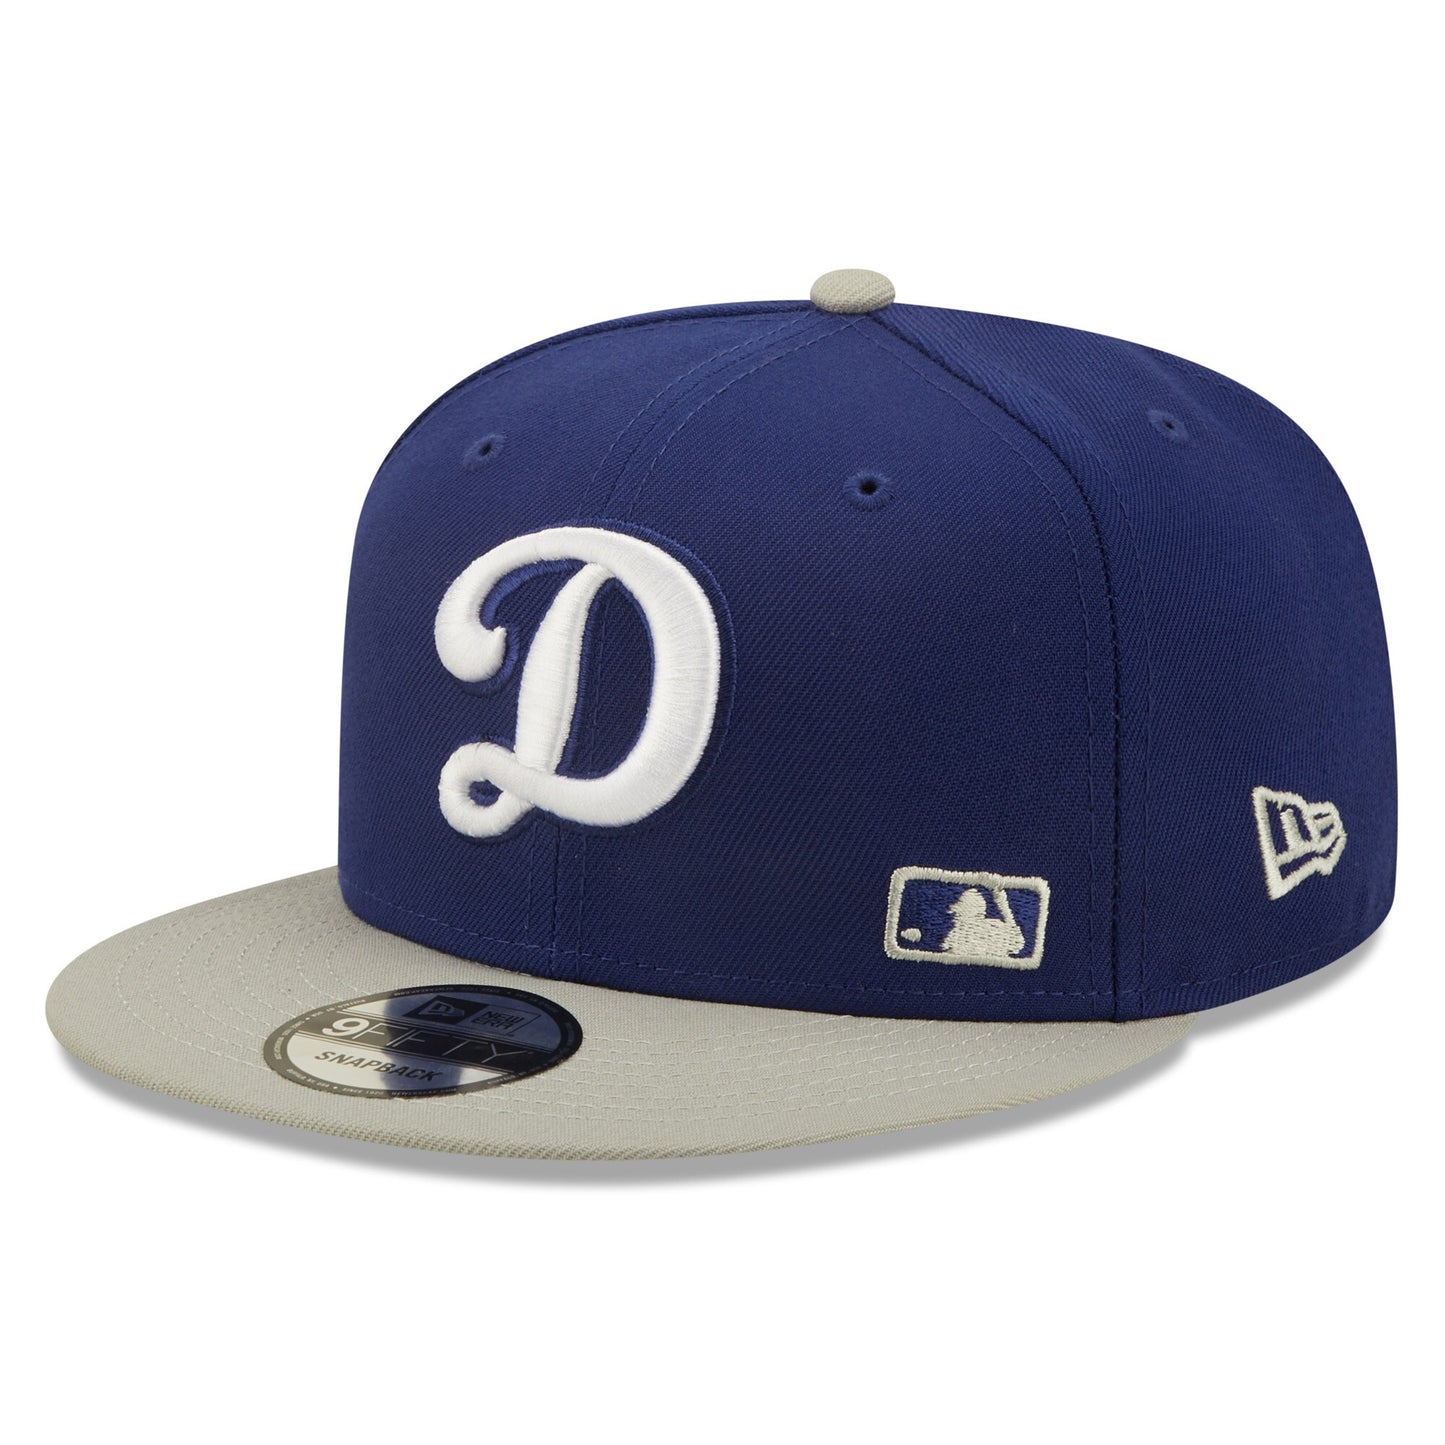 Los Angeles Dodgers New Era Flawless 9FIFTY Snapback Hat - Royal/Gray